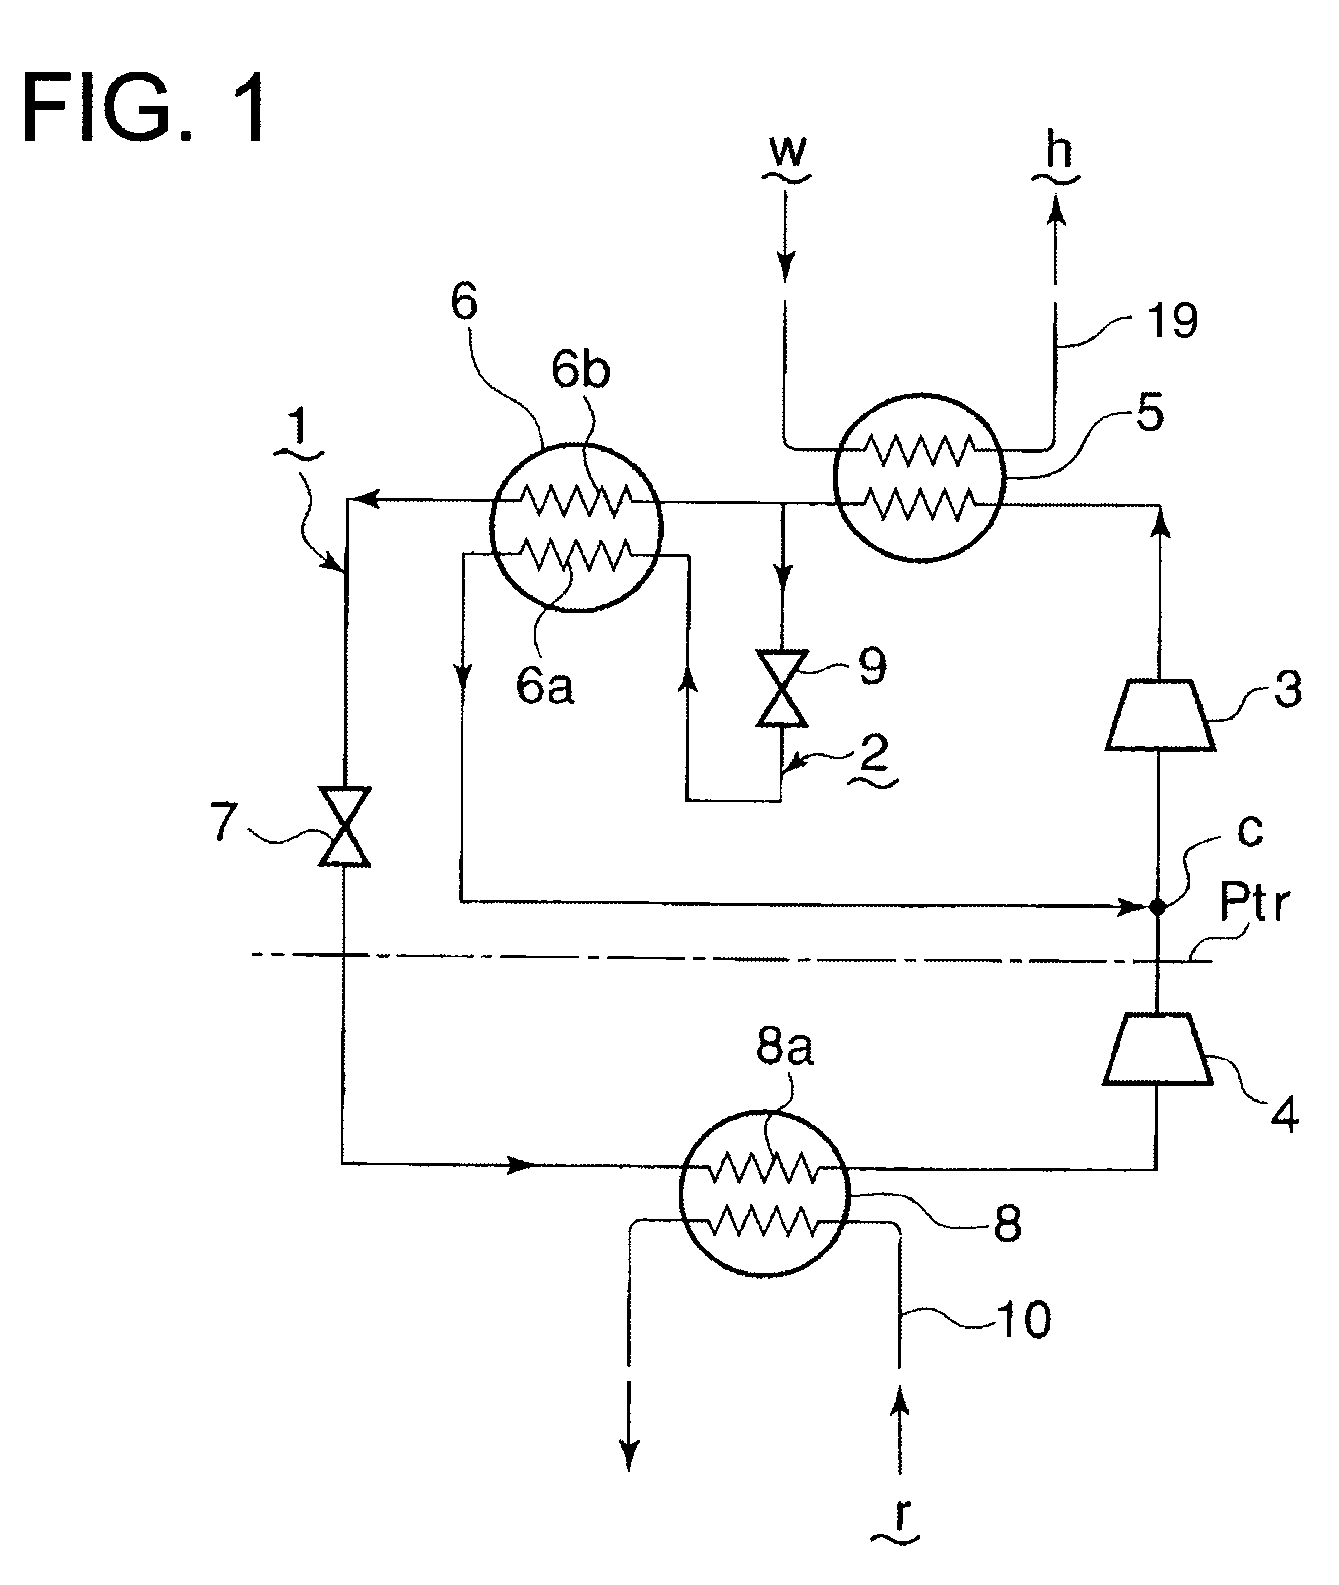 Co2 cooling and heating apparatus and method having multiple refrigerating cycle circuits